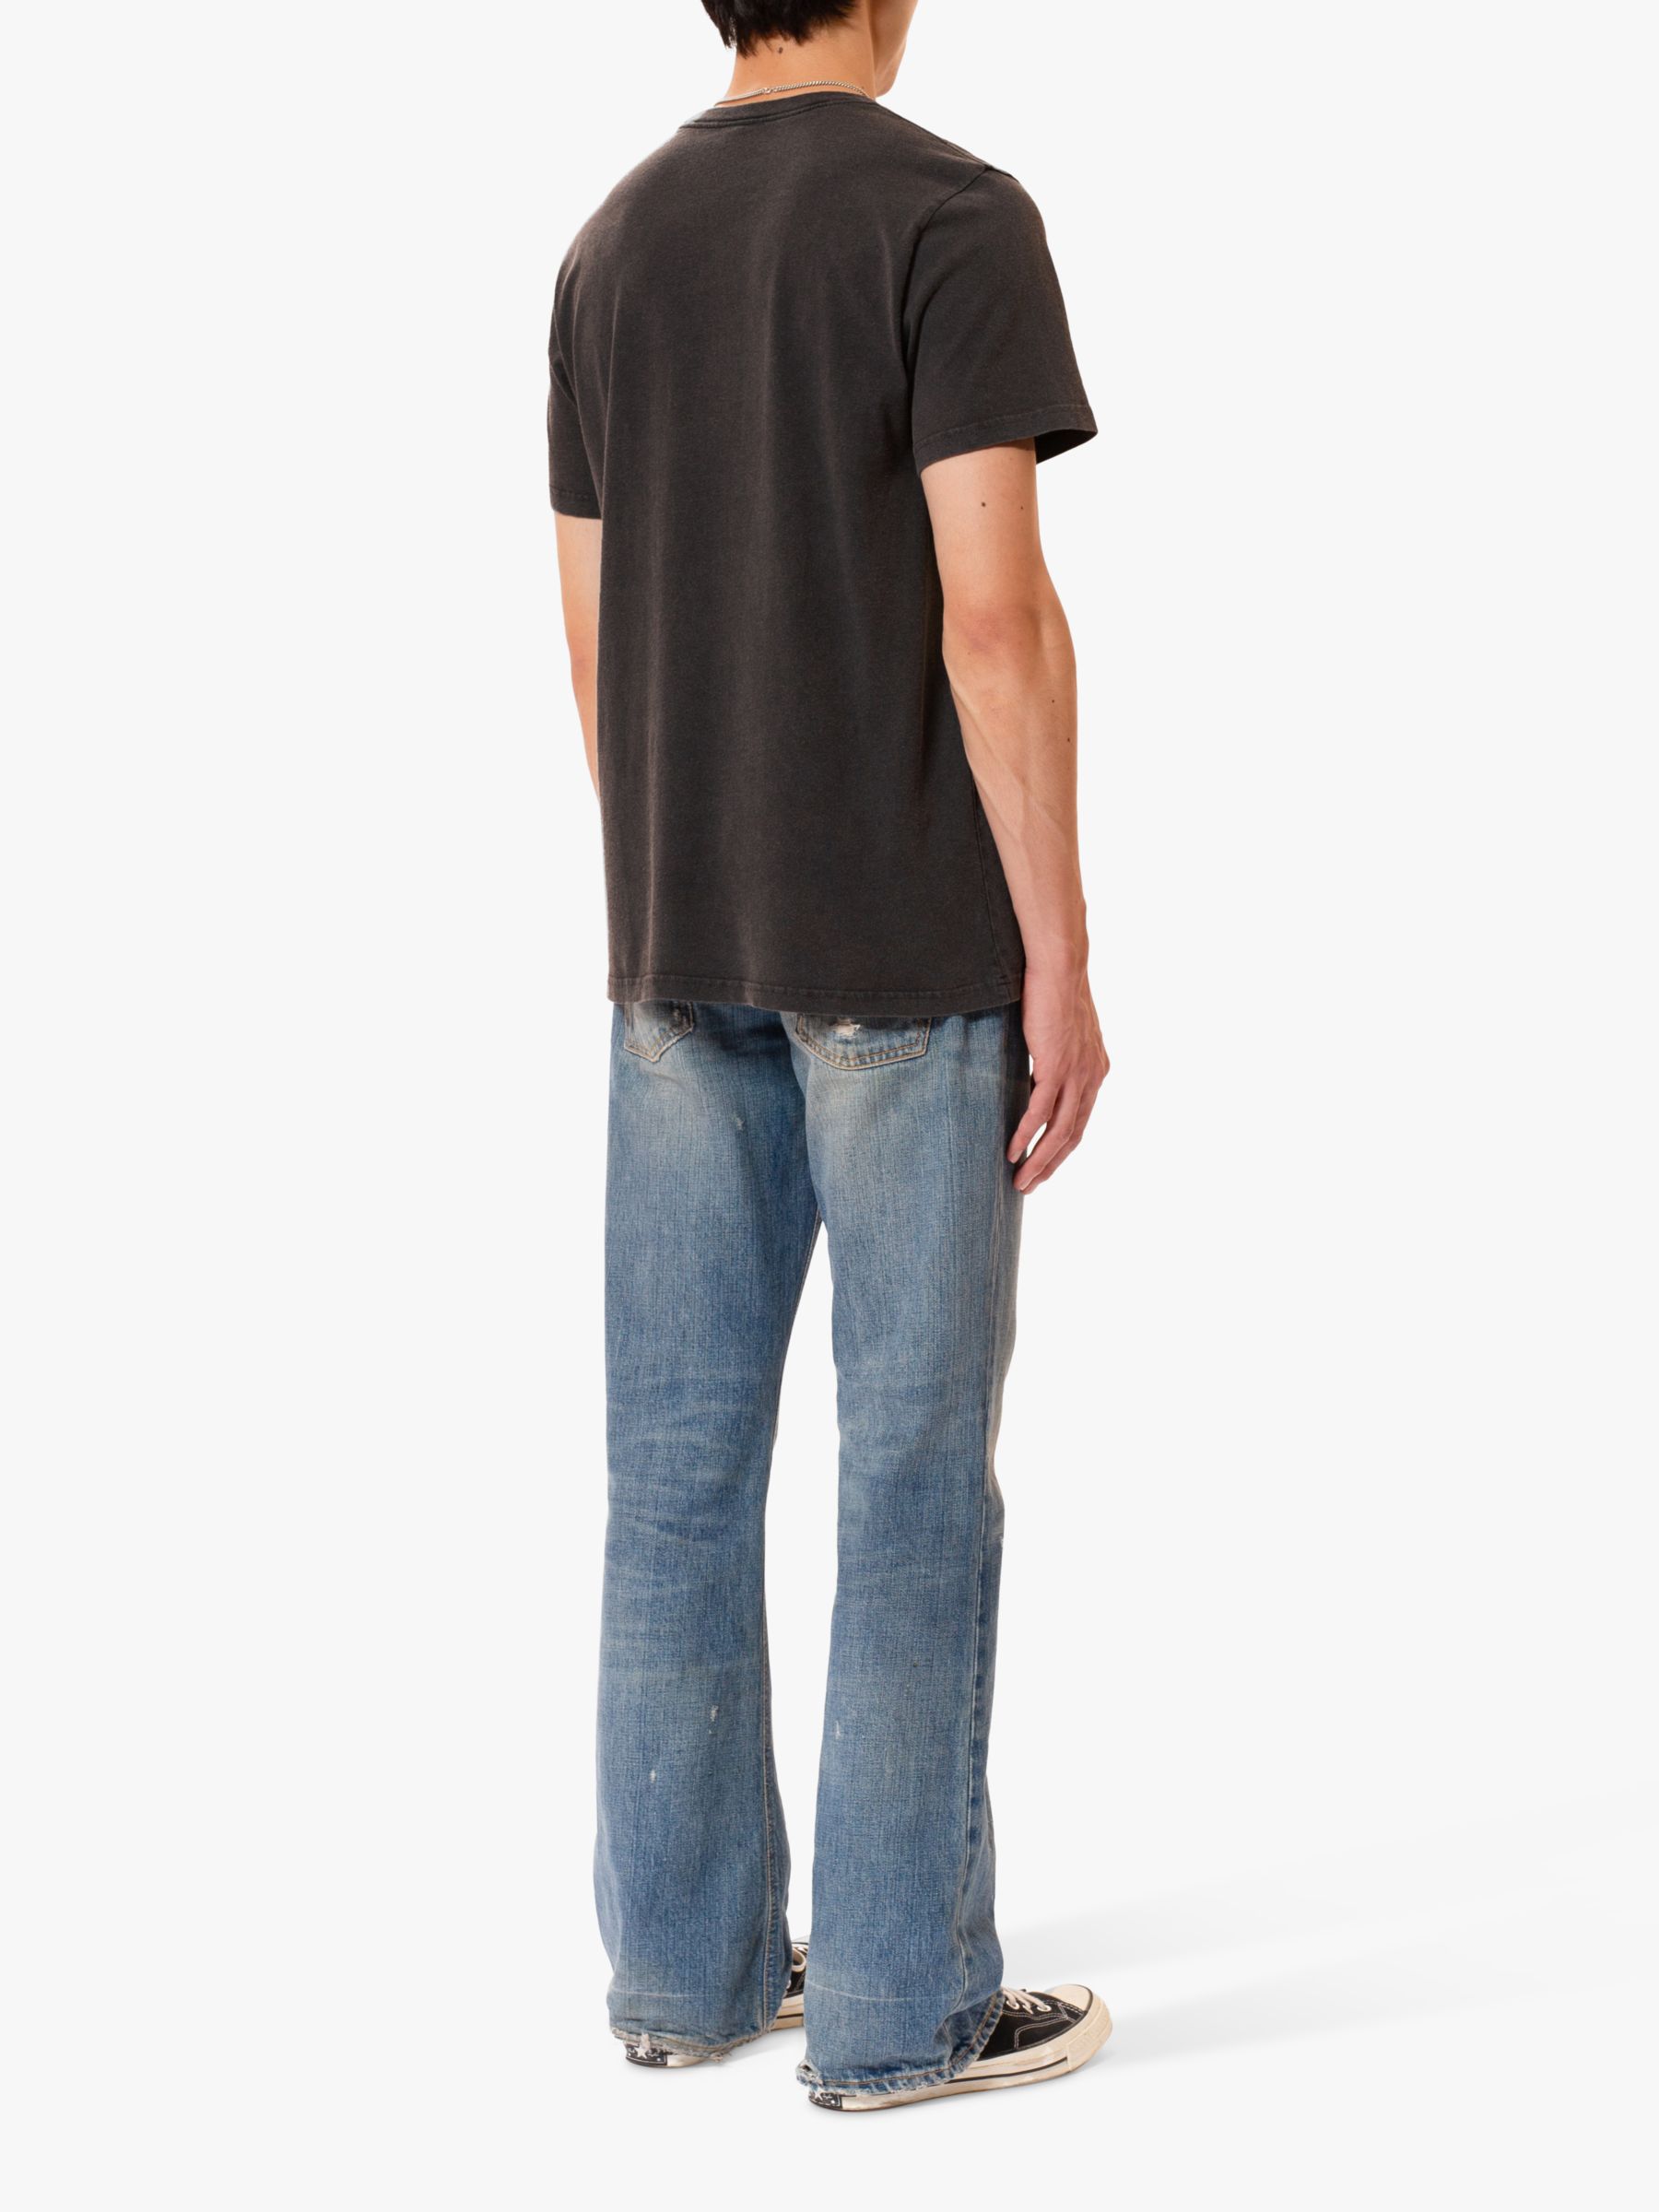 Buy Nudie Jeans Roy Boogie T-Shirt, Antracite Online at johnlewis.com